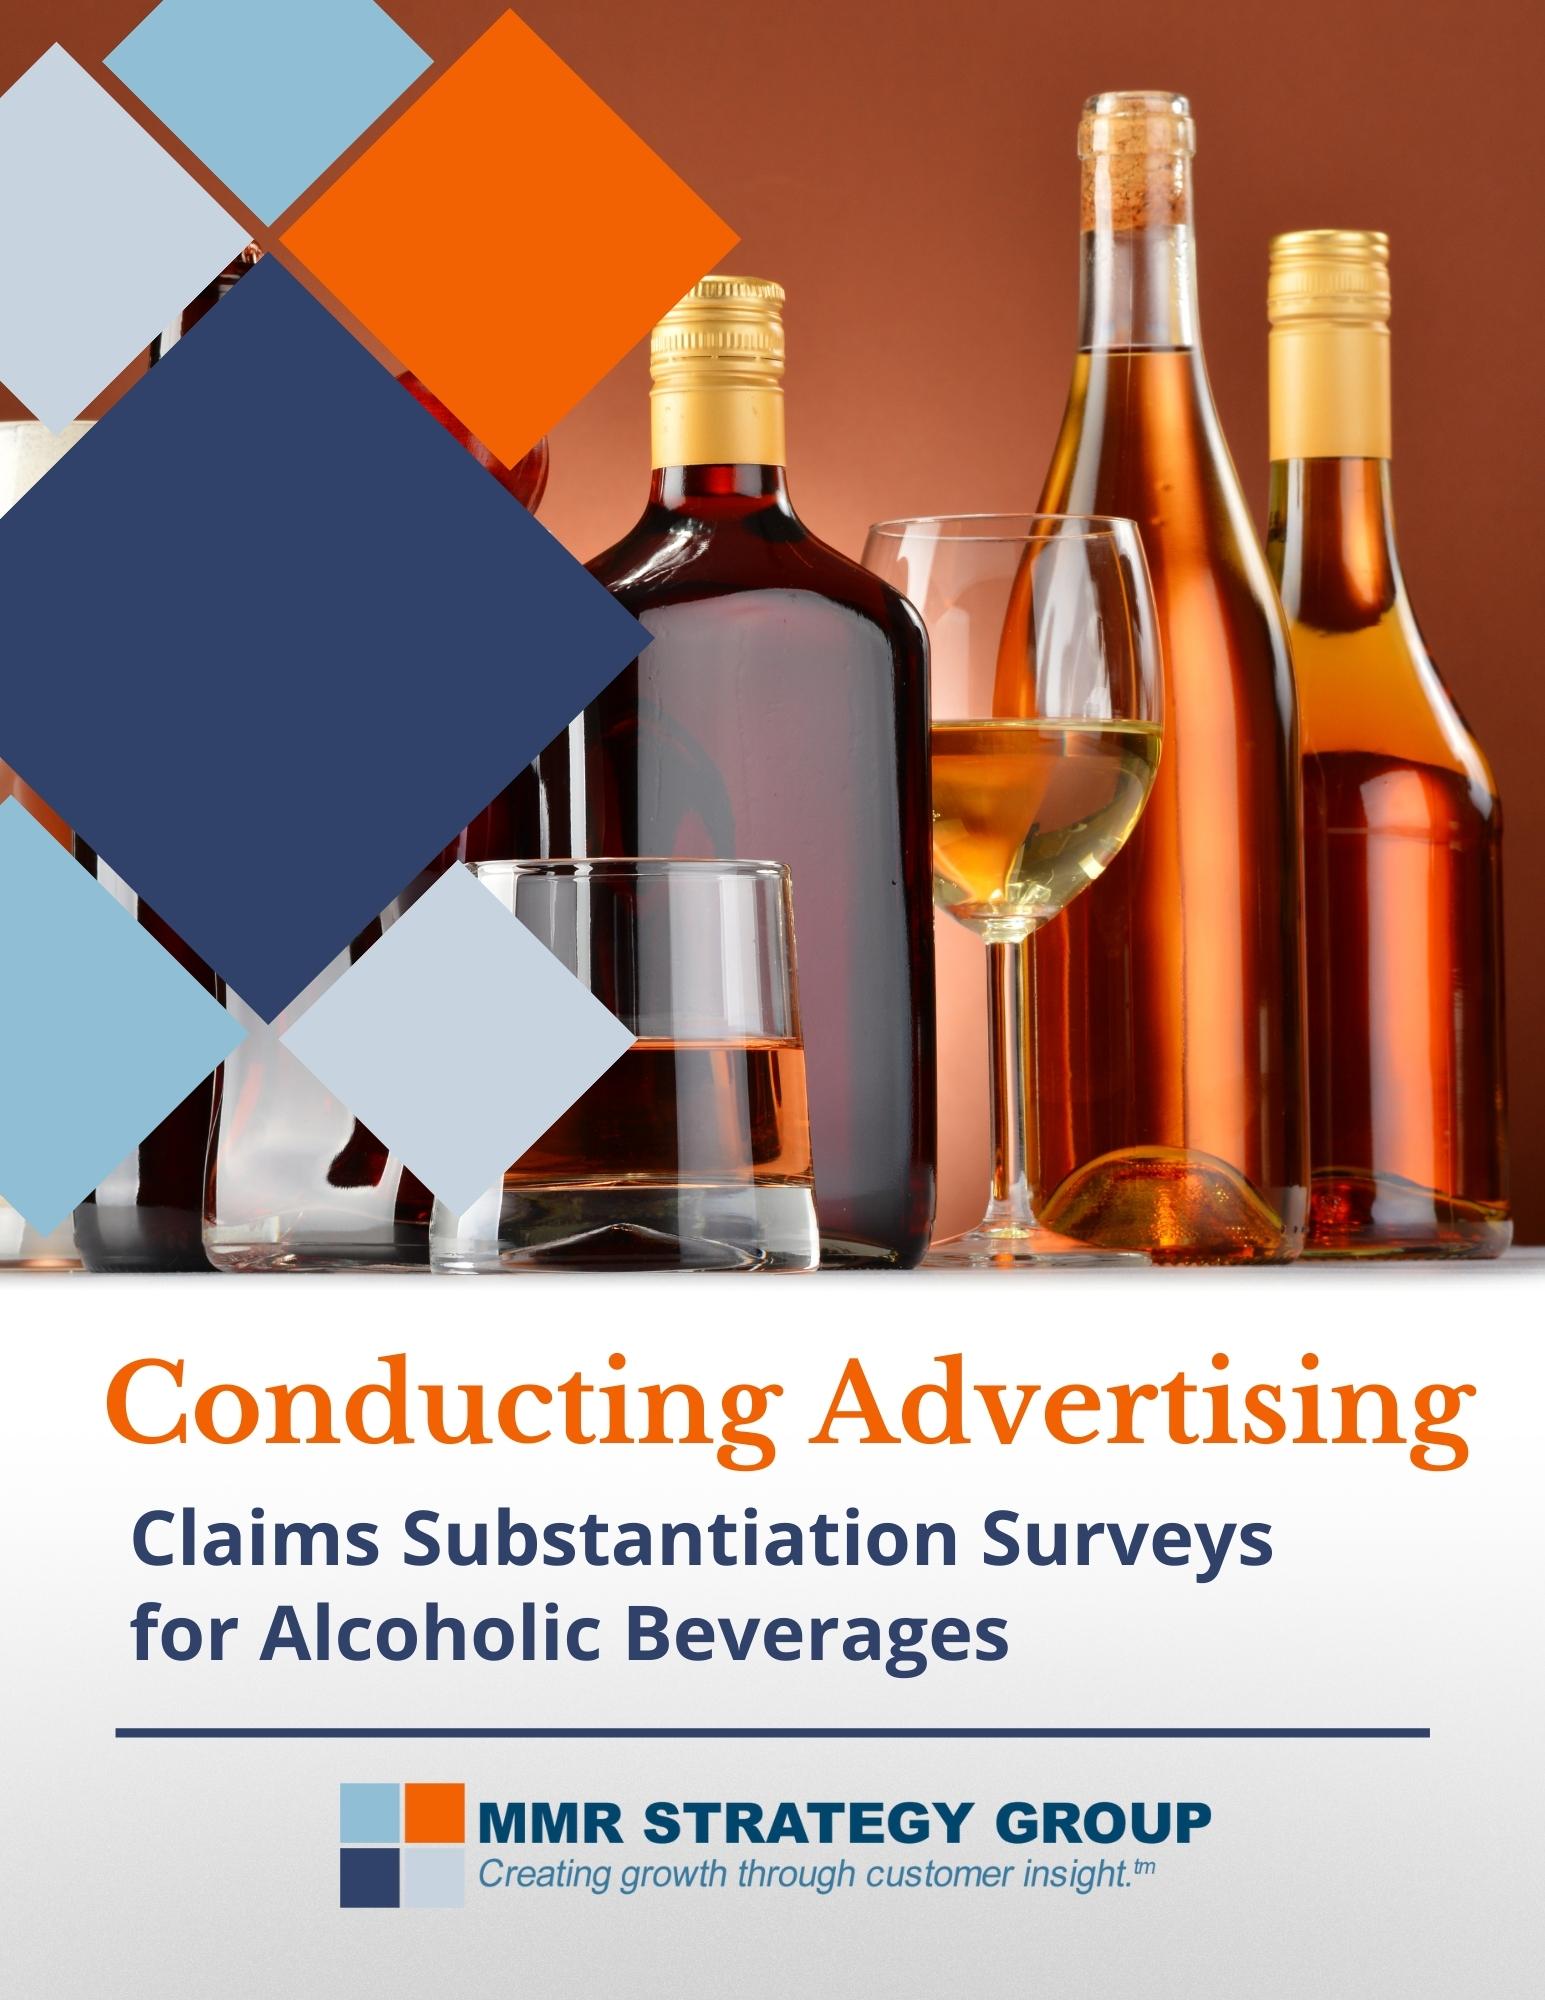 Claims for Alcoholic Beverages from MMR Strategy Group 